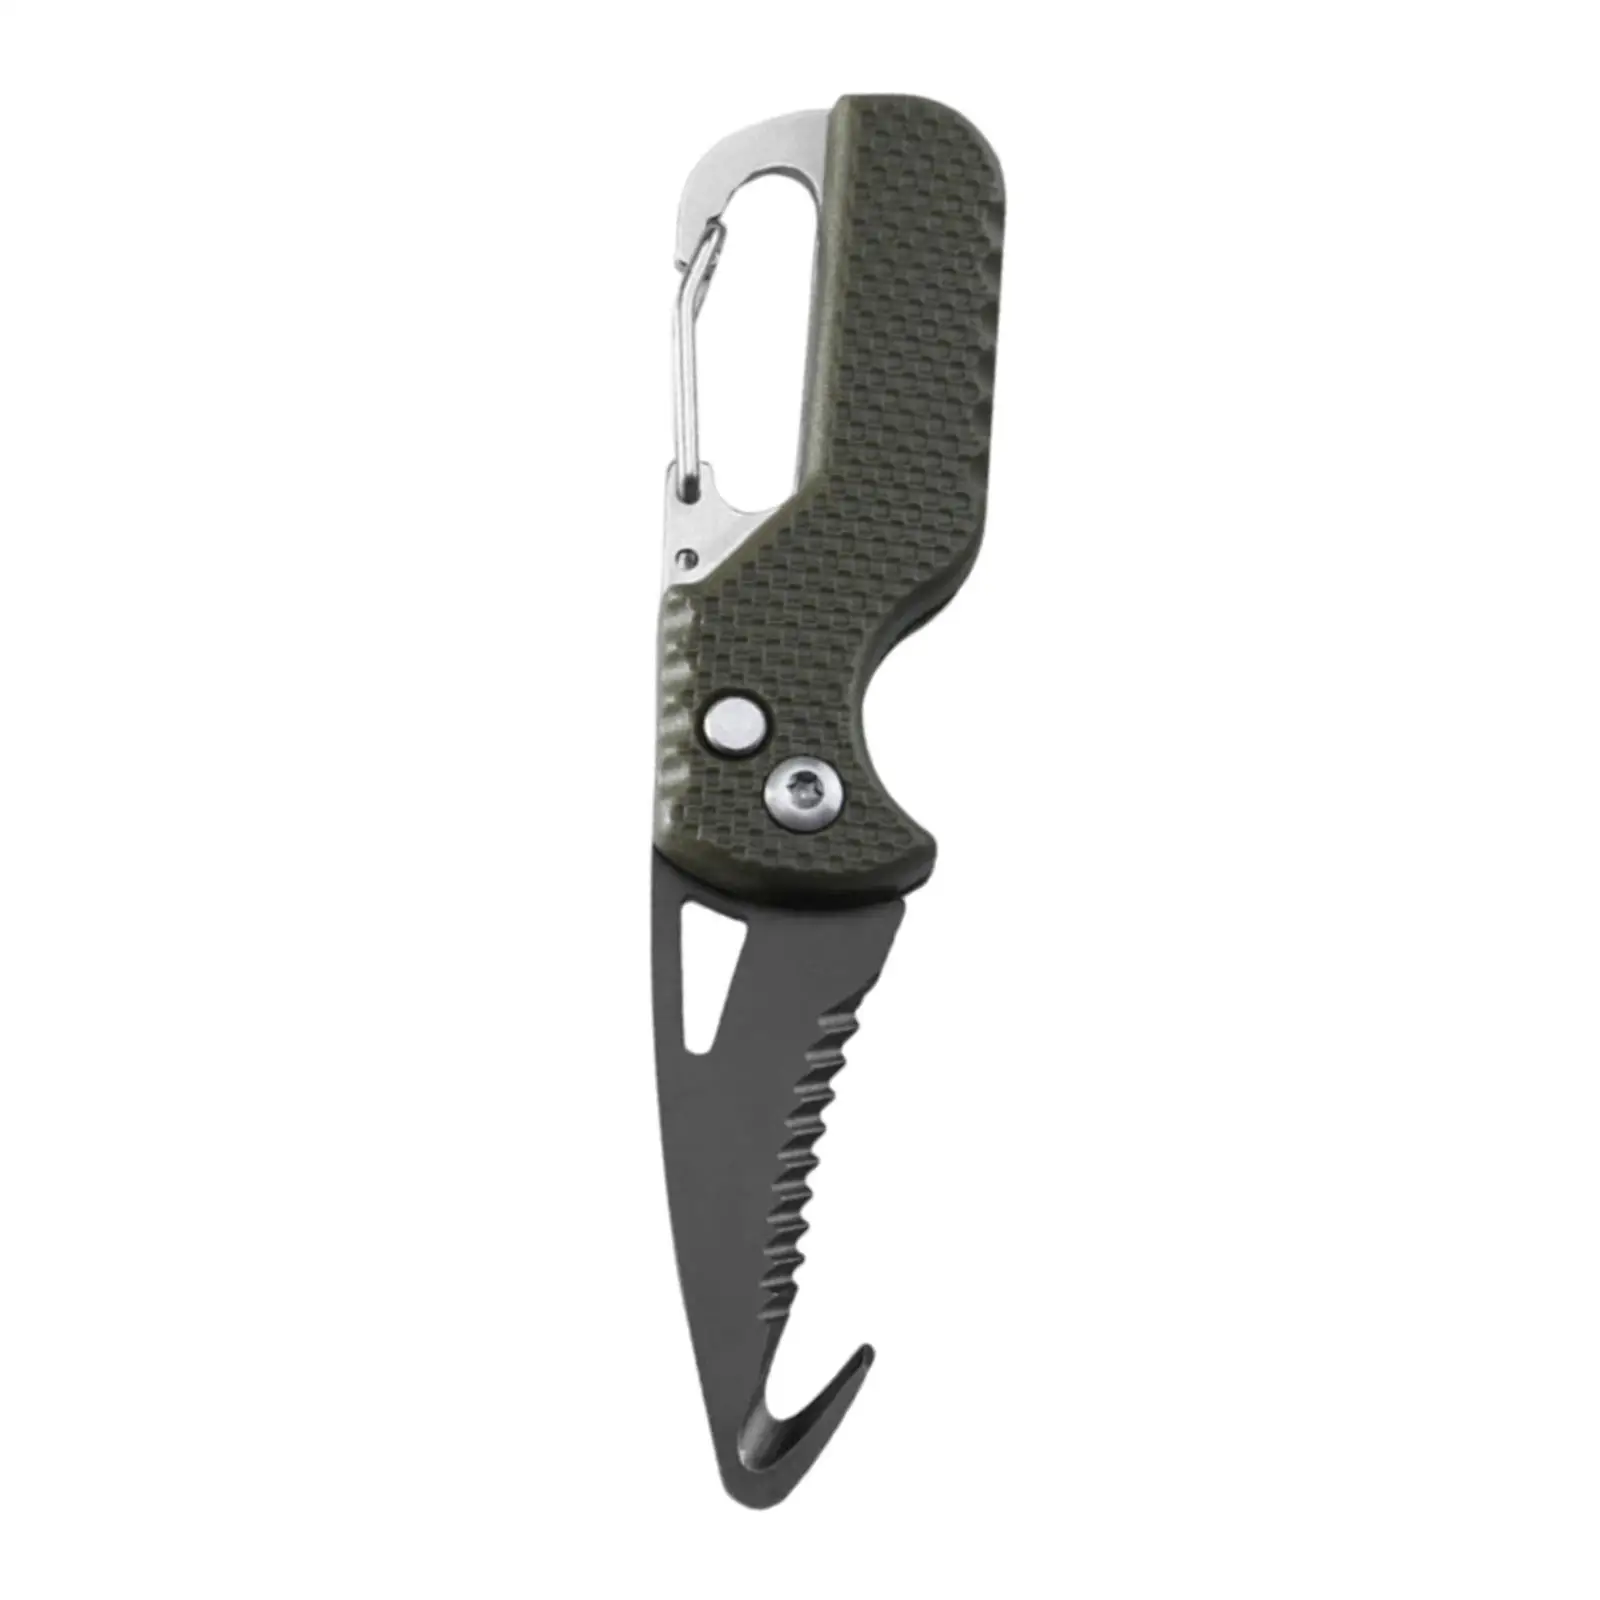 Bottle Opener Durable Utility Tool Multifunctional Tool Mini Box Cutter Foldable Cutter for Survival Camping Fishing Outdoor